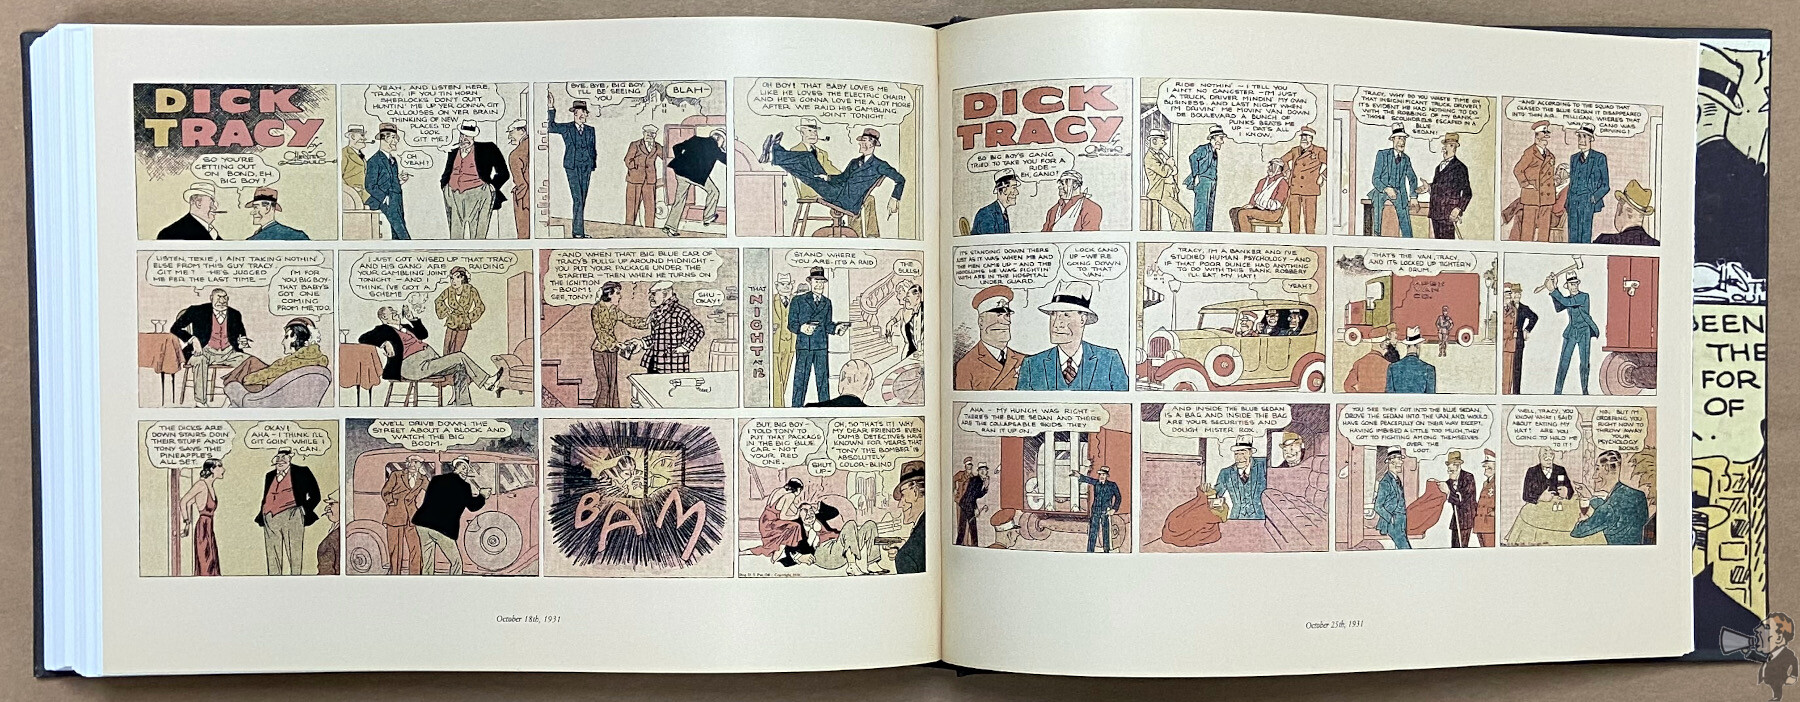 The Complete Chester Goulds Dick Tracy Volume One interior 7